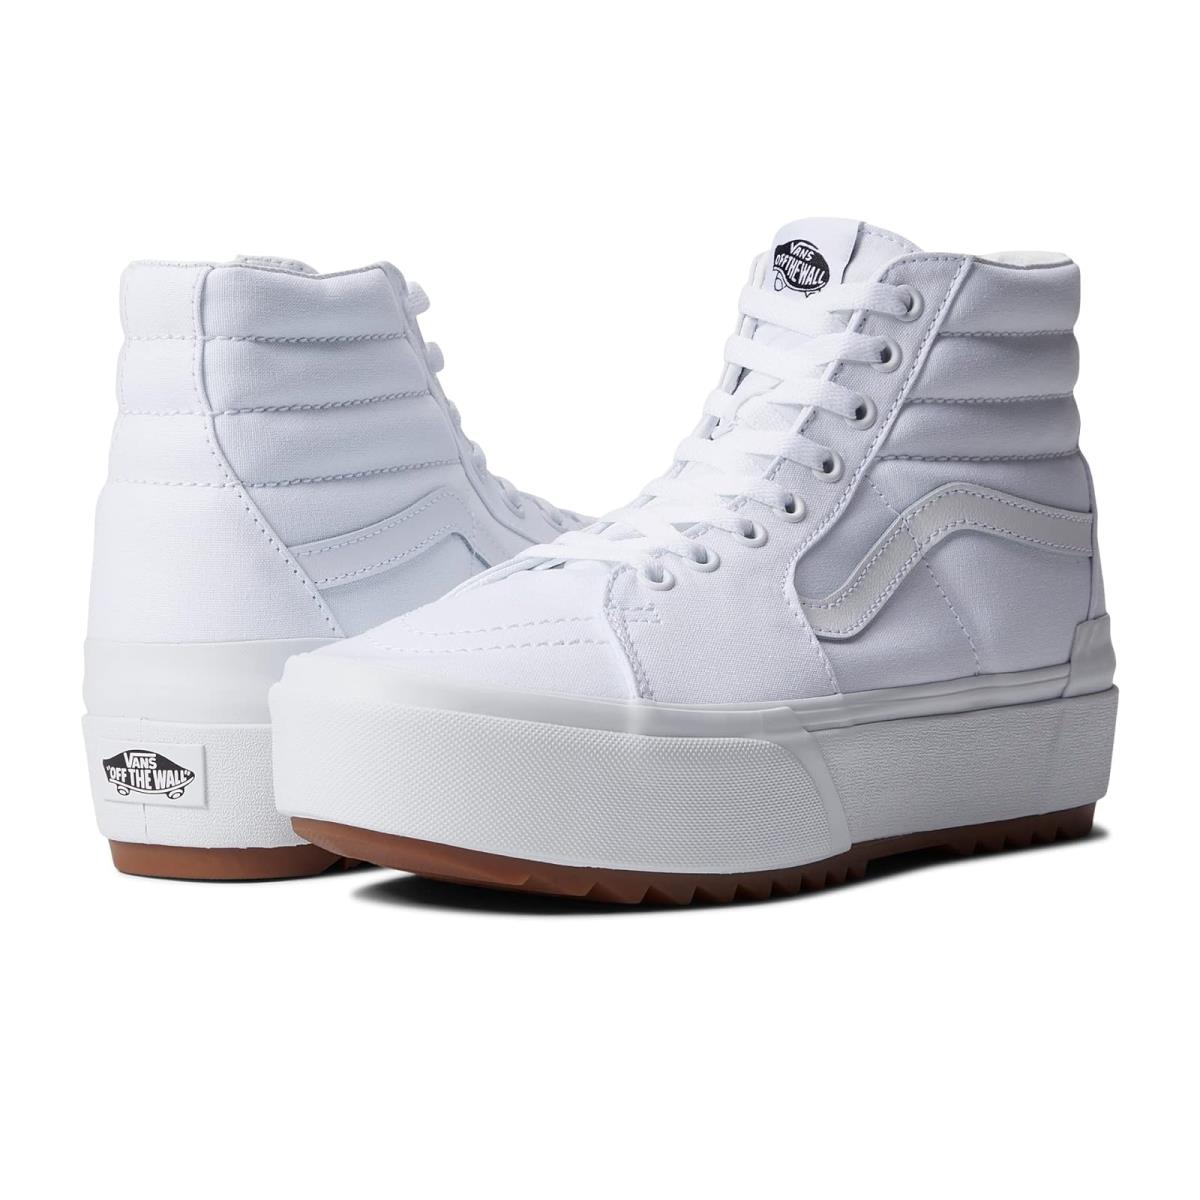 Unisex Sneakers Athletic Shoes Vans Sk8-Hi Stacked (Canvas) True White